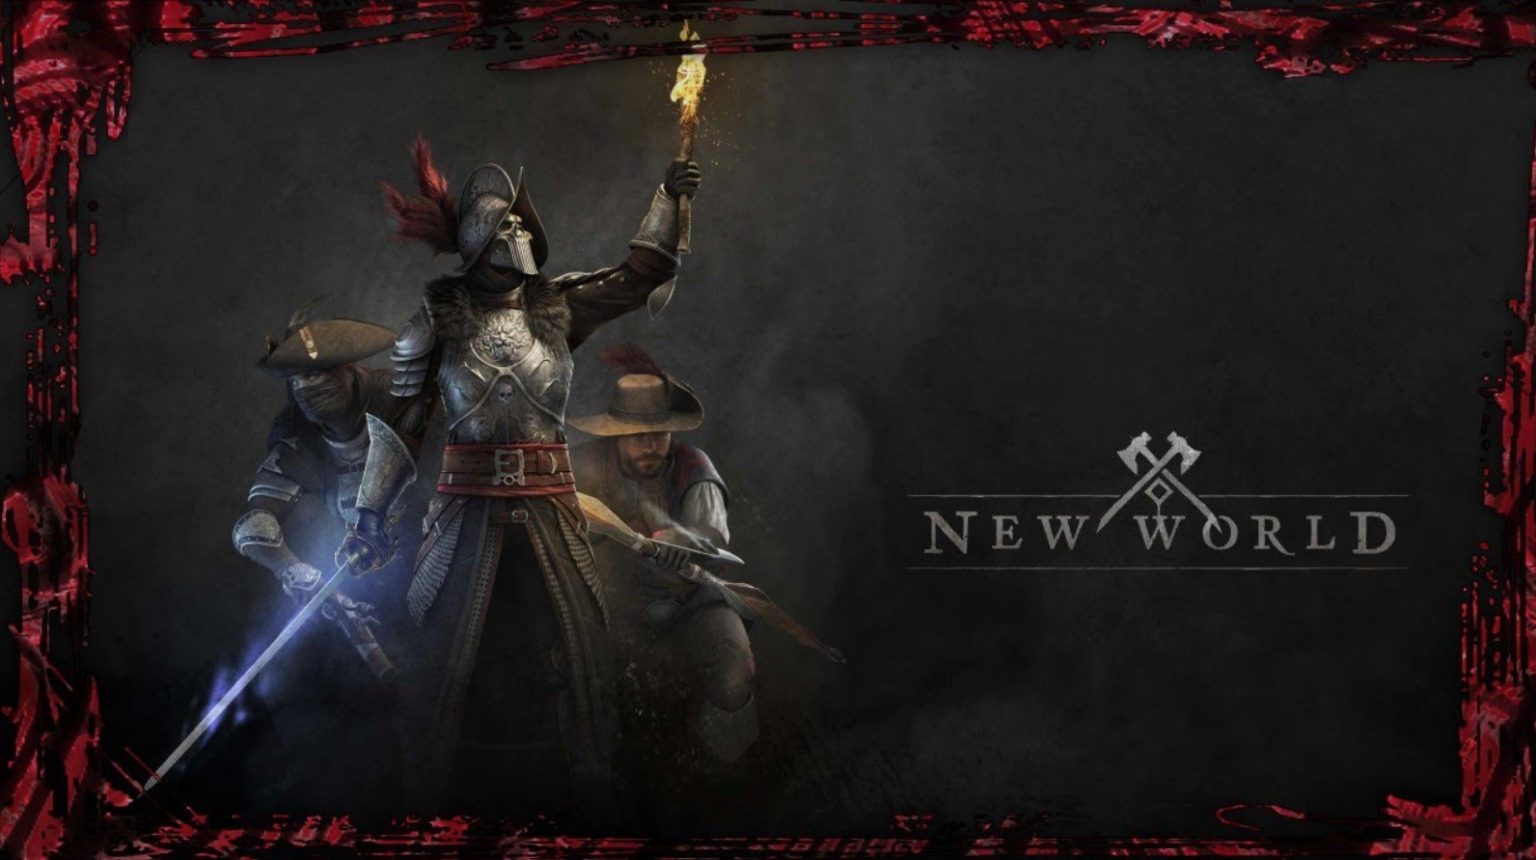 NEW WORLD free Download PC Game (Full Version)